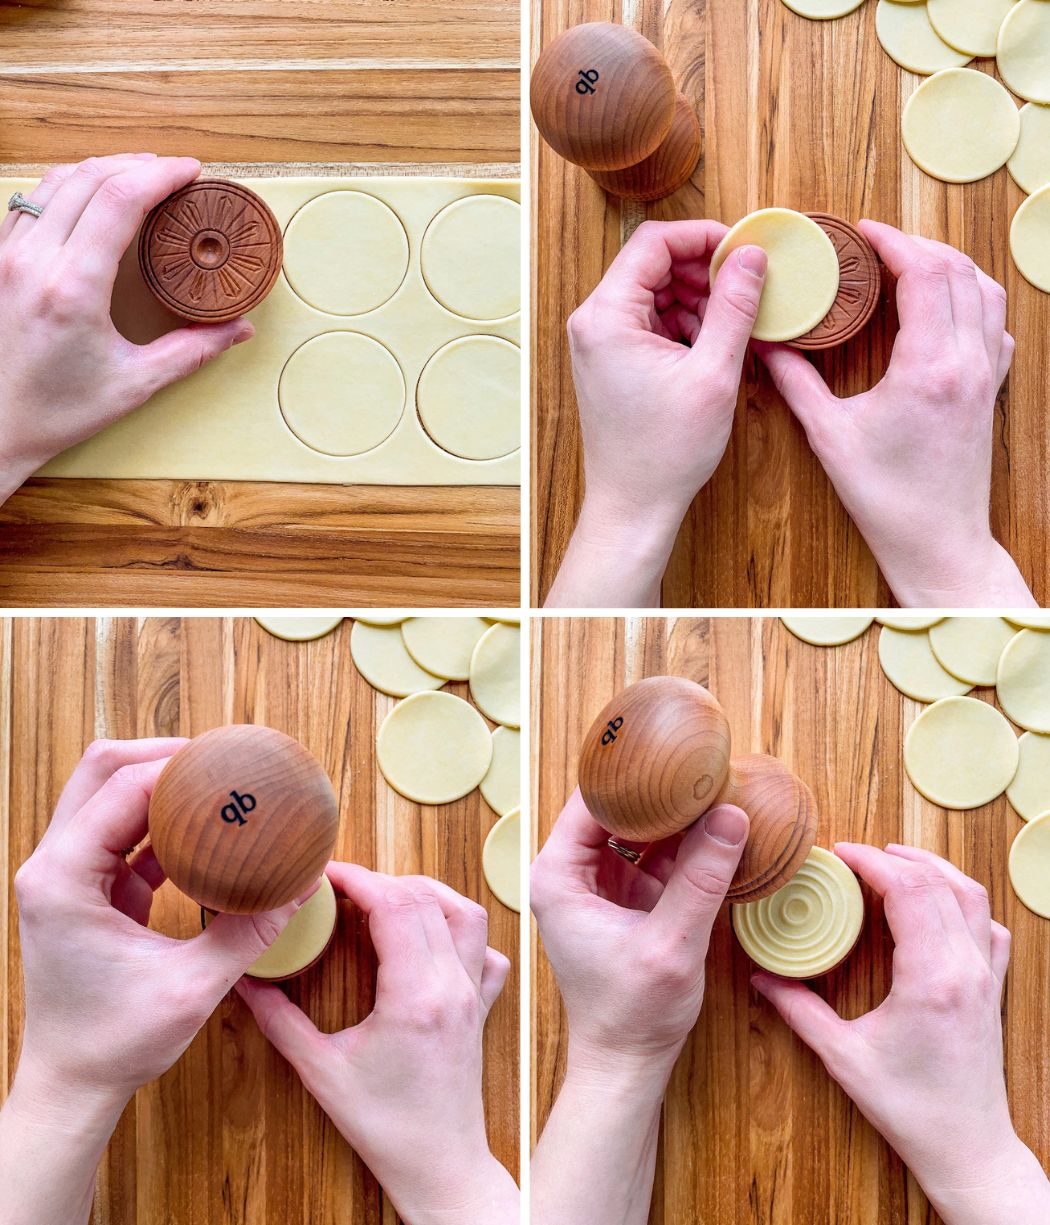 There are four images, showing the steps for making corzetti pasta. The first image shows cutting out circles of pasta; the second shows a hand placing the circle over a circular patterend stamp; the third shows placing the stamp on top; the fourth reveals the finished design.